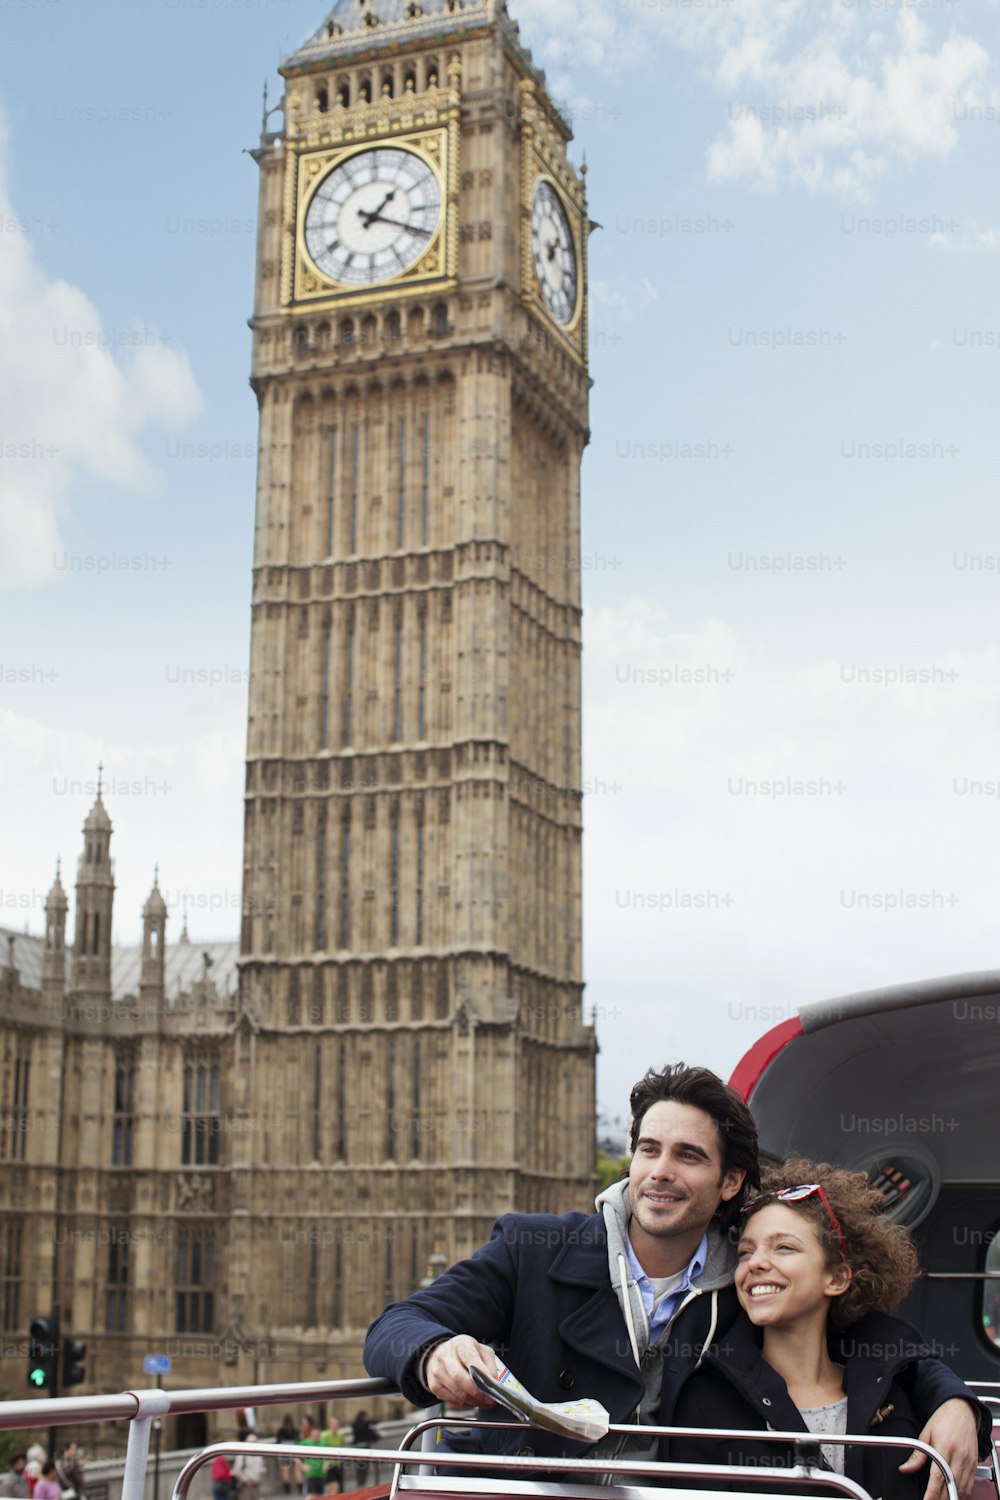 a man and a woman taking a picture in front of the big ben clock tower